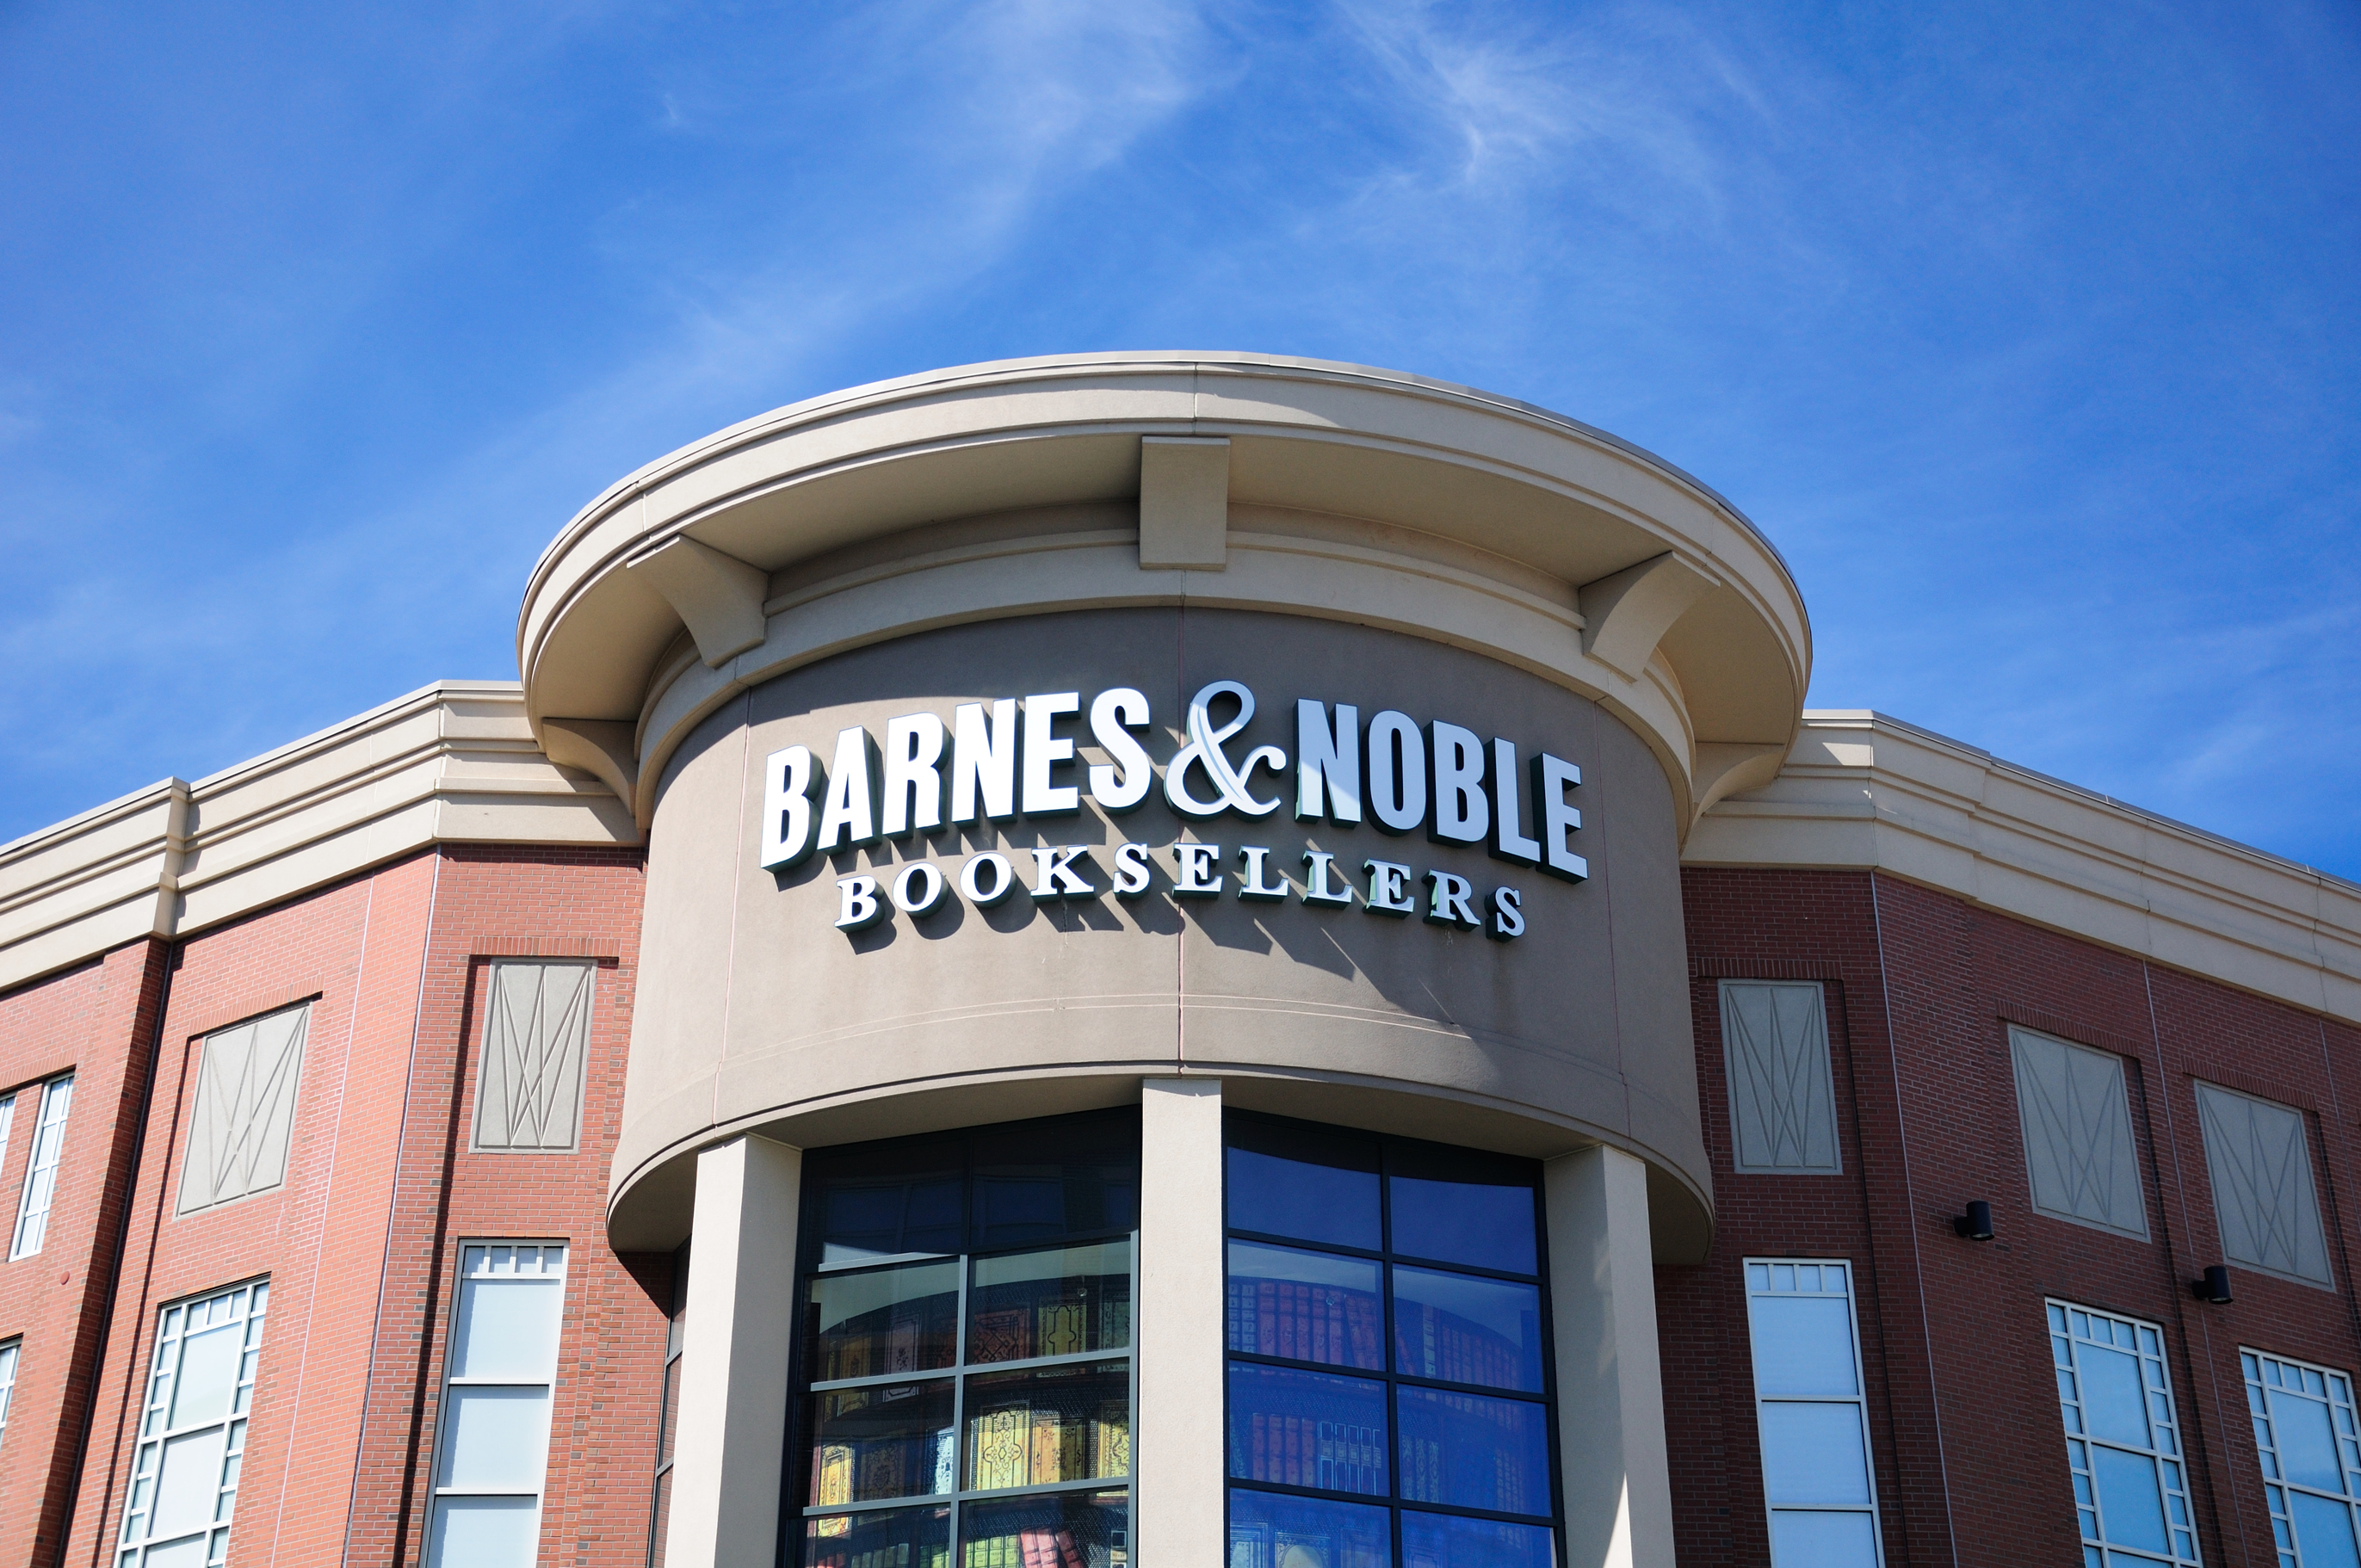 Barnes and Noble coupons: Get BOGO 50% books